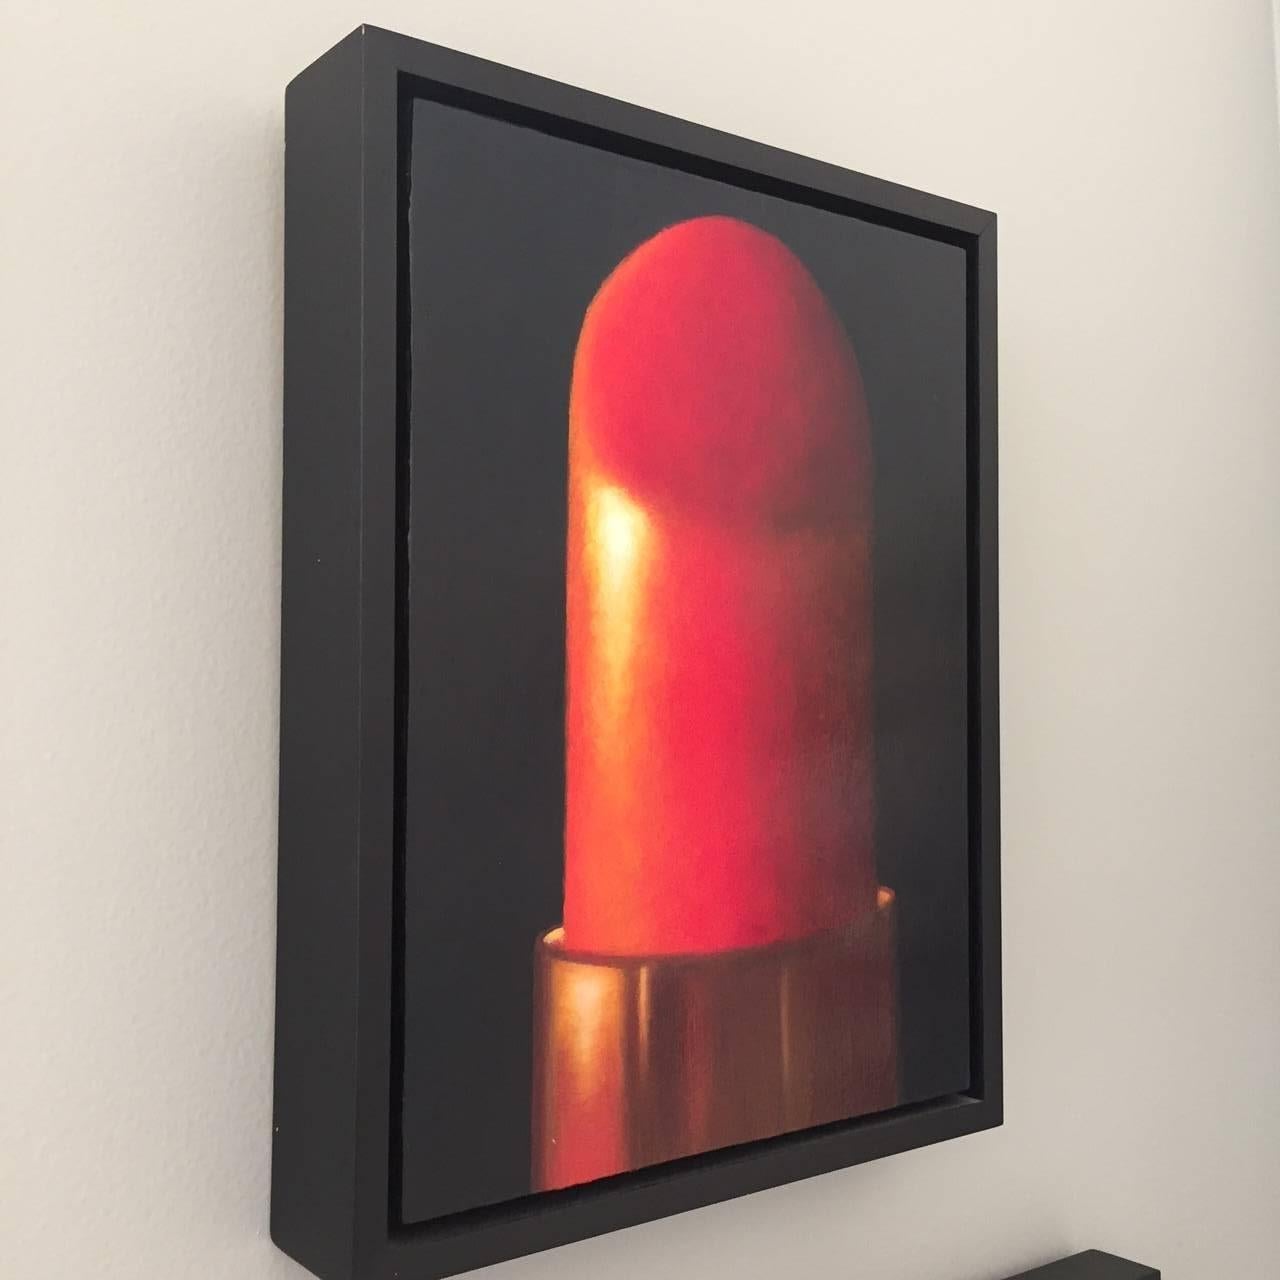 Red designer lipstick presented in this larger than life American realist work of art that also bridges abstraction. Drama, and the color red, star in this 12 x 9 inch oil on panel painting, from artist Elizabeth Barlow, who works in the spirit of